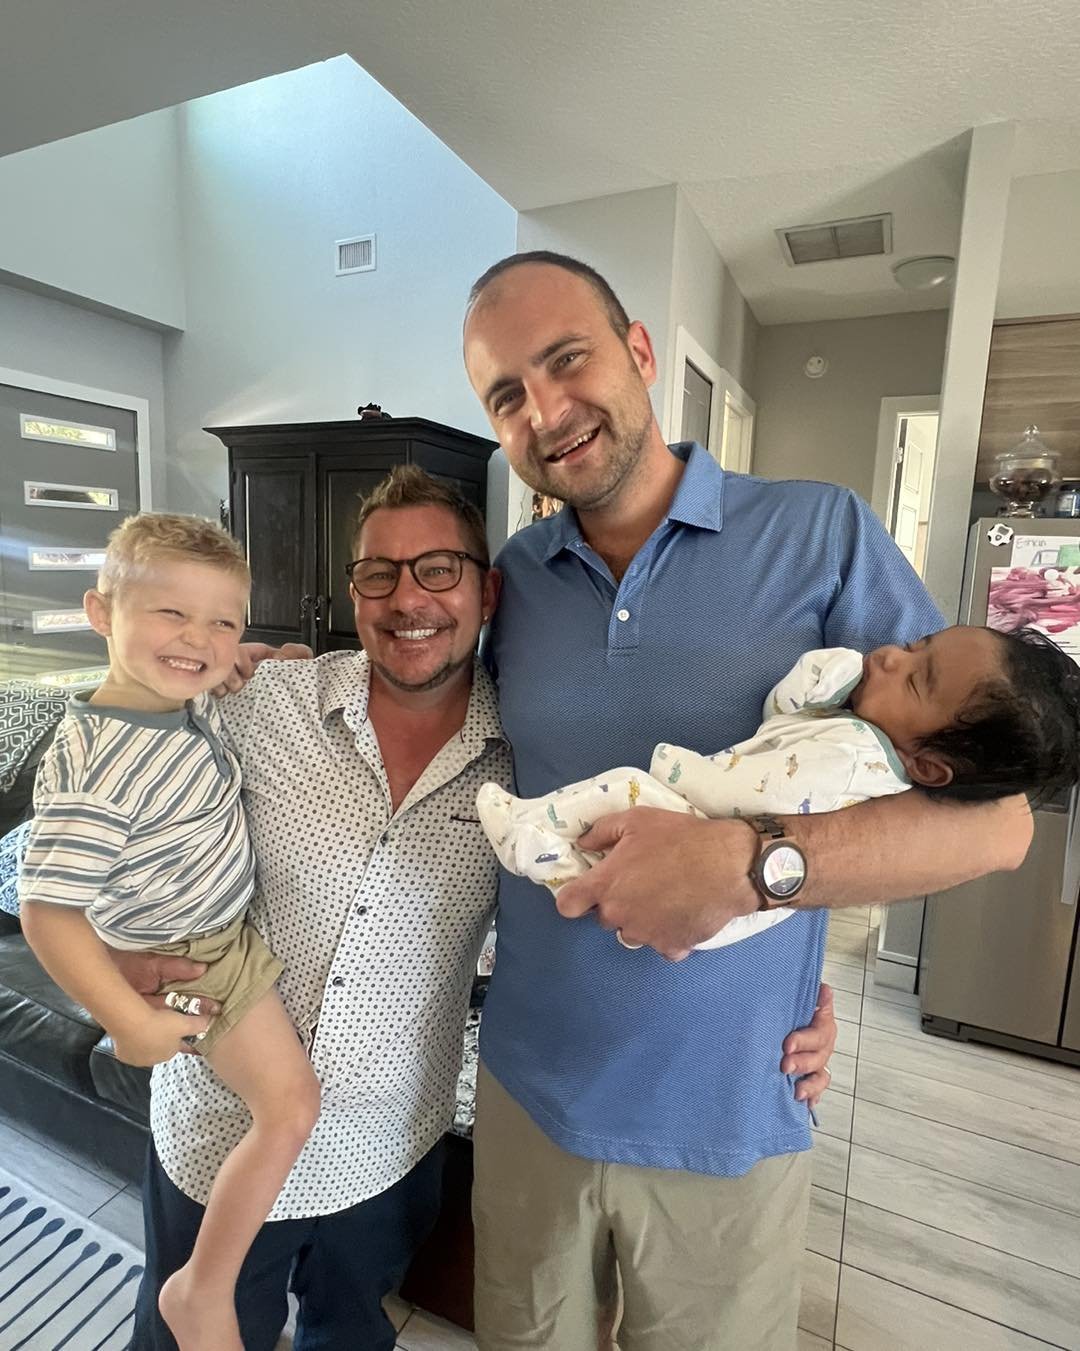 These two dads.  Love them!  Their family is now complete thanks to adoption.  Life is a bit hectic for them right now, but they wouldn't want it any other way! 🌈💜